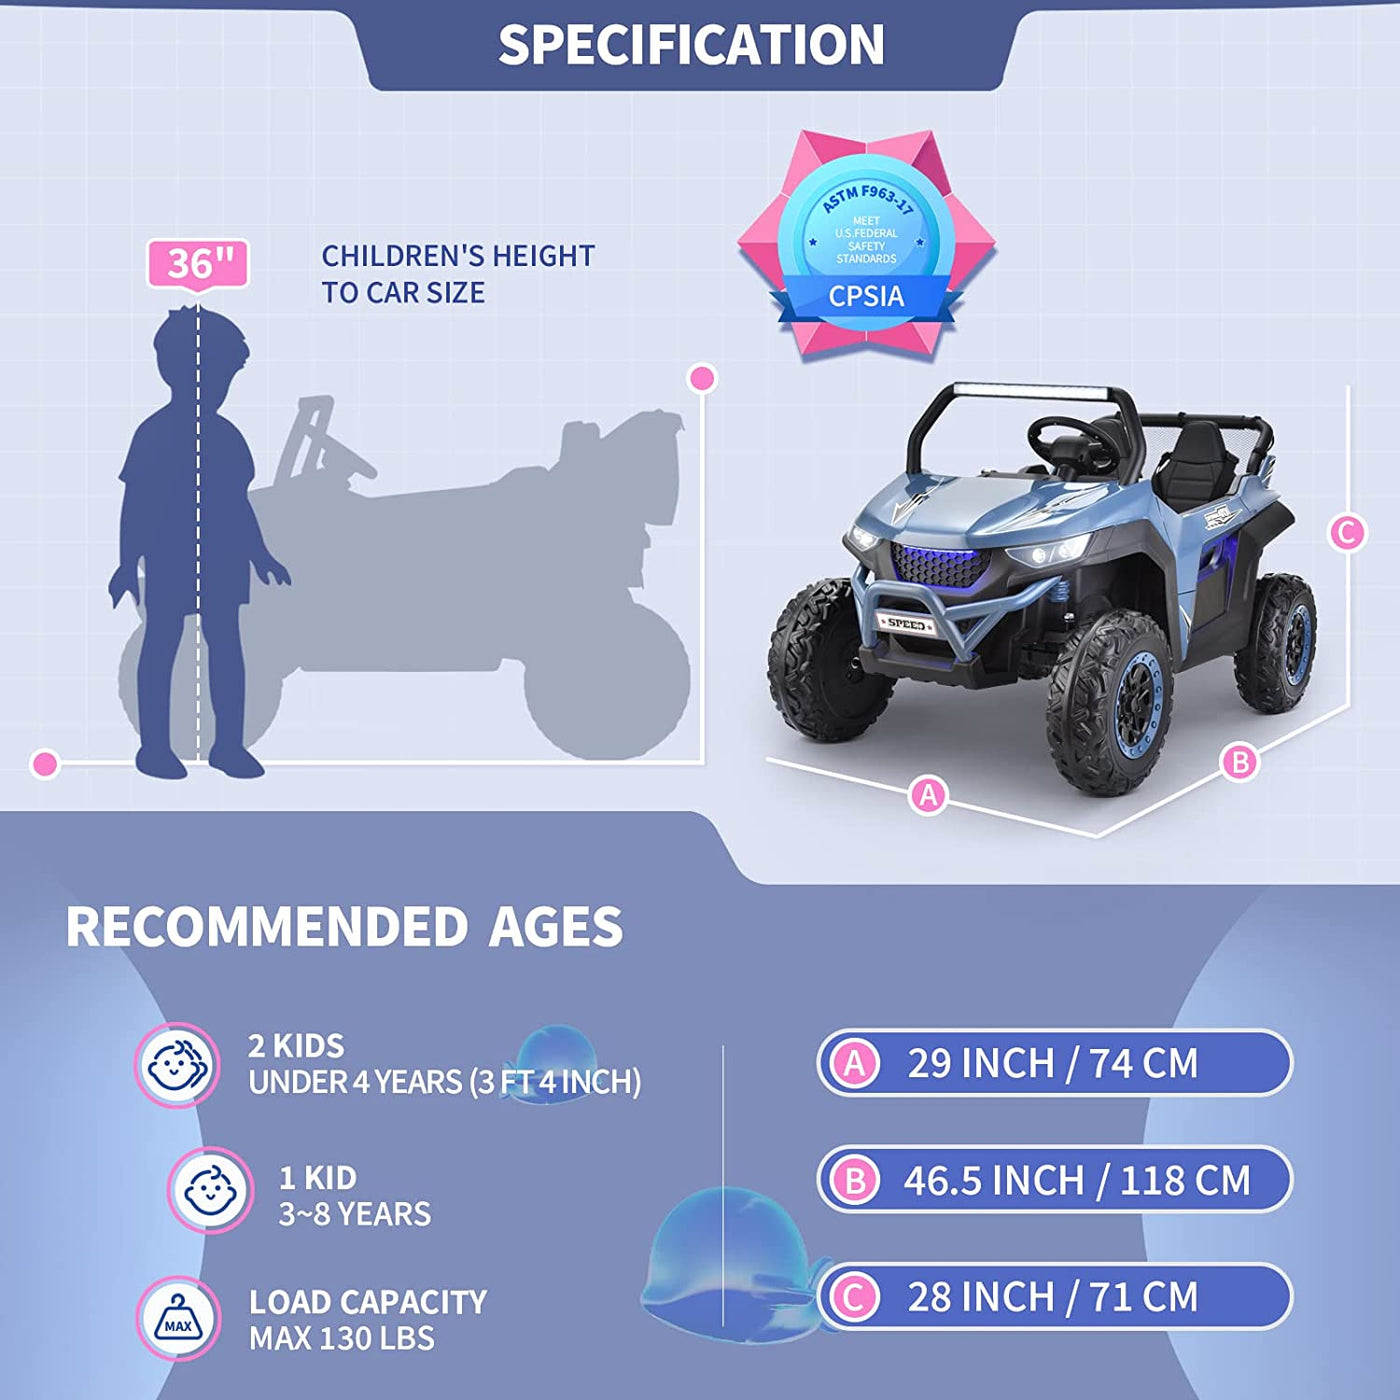 Joywhale 24V 2 Seater Kids Ride on UTV Car, with 10AH Big Battery, 4x75W Strong Motor, Easy-Drag 4WD, Remote Control, Leather Seat, Soft Brake & Suspension, BW-U20 Pro